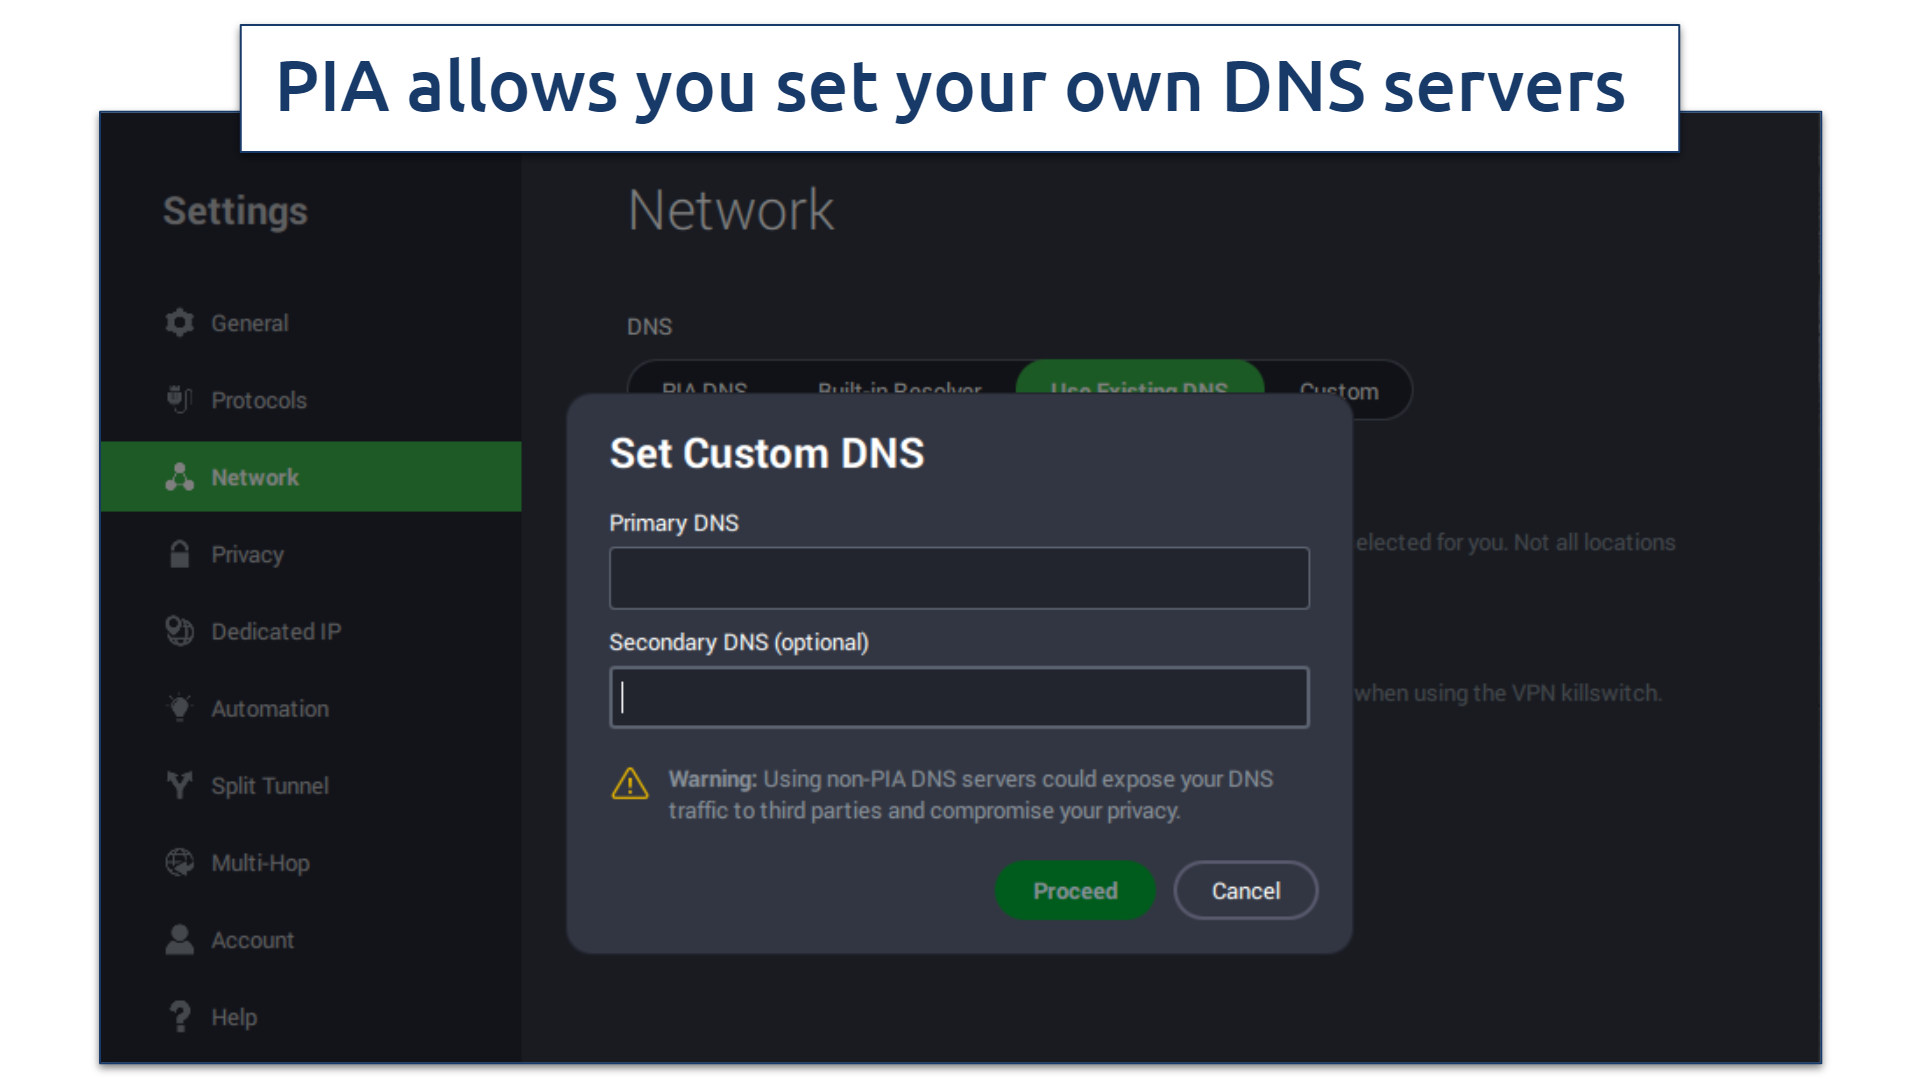 Image showing how to set custom DNS servers on PIA